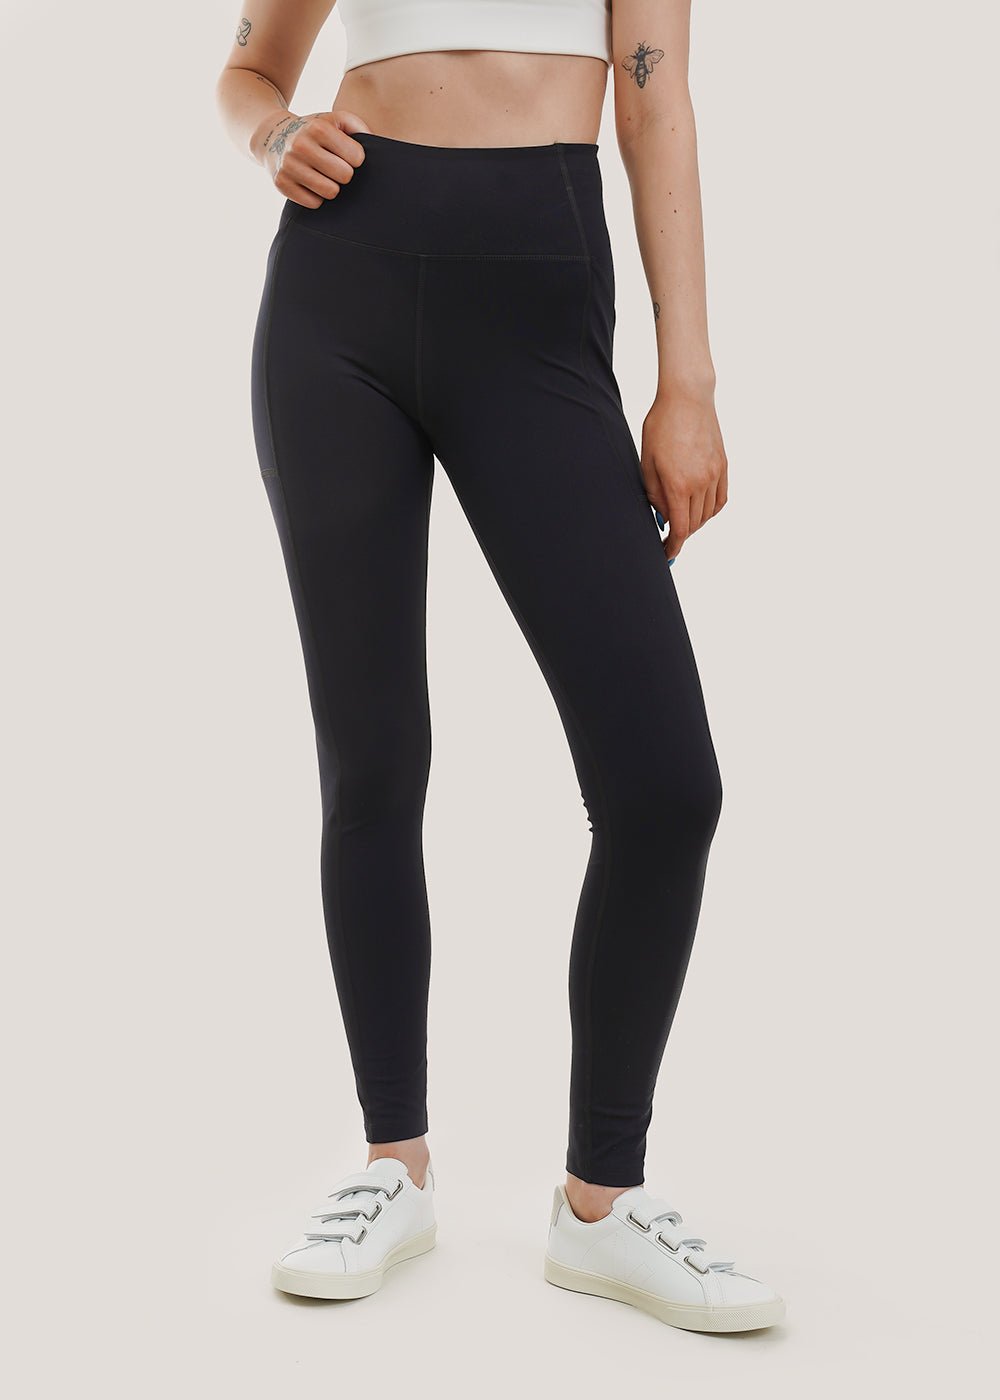 Girlfriend Collective Black High Rise Pocket Legging - New Classics Studios Sustainable Ethical Fashion Canada